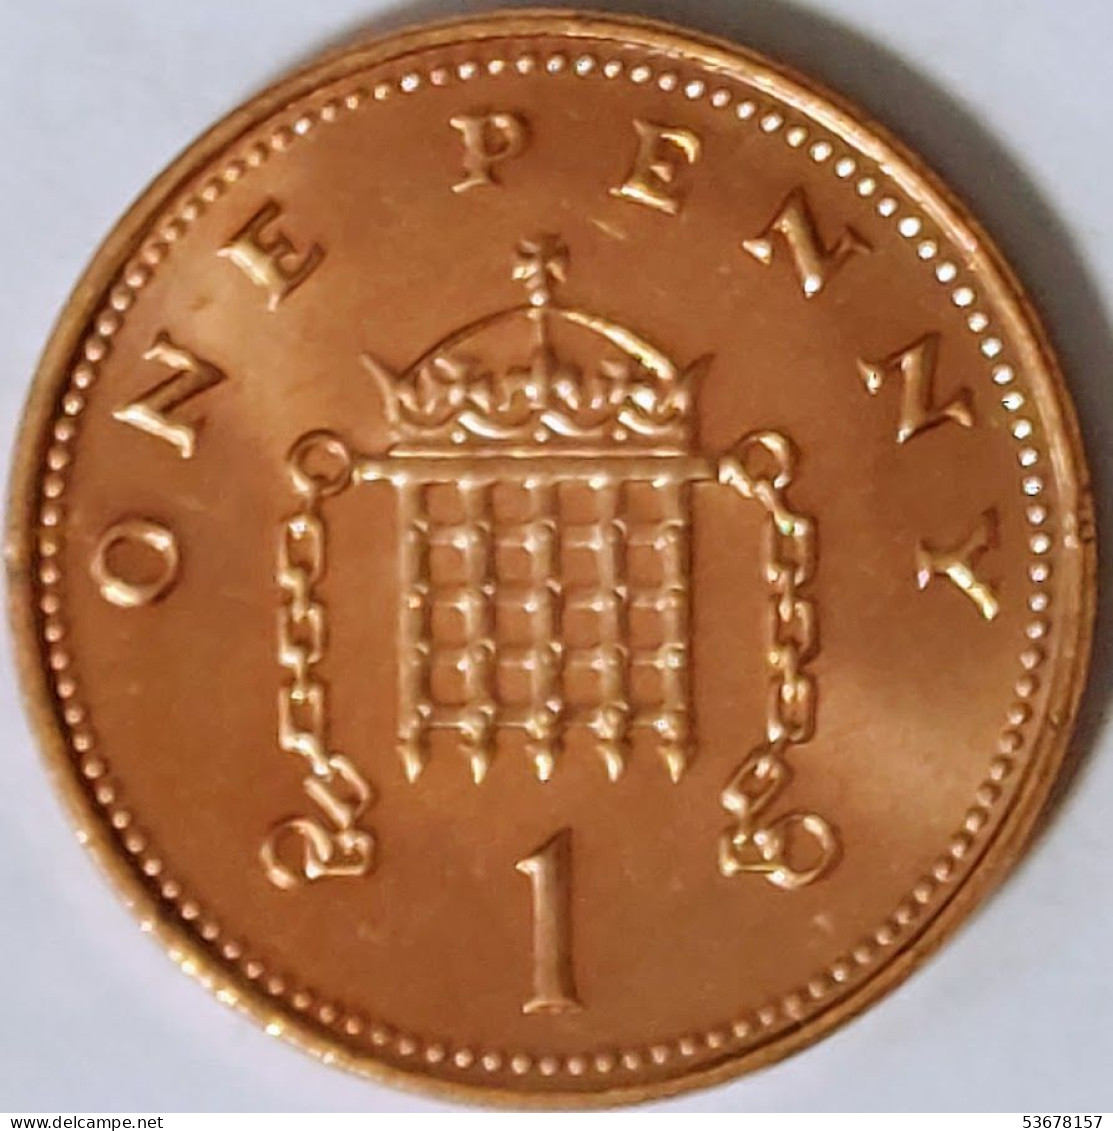 Great Britain - Penny 2002, KM# 986 (#2308) - 1 Penny & 1 New Penny